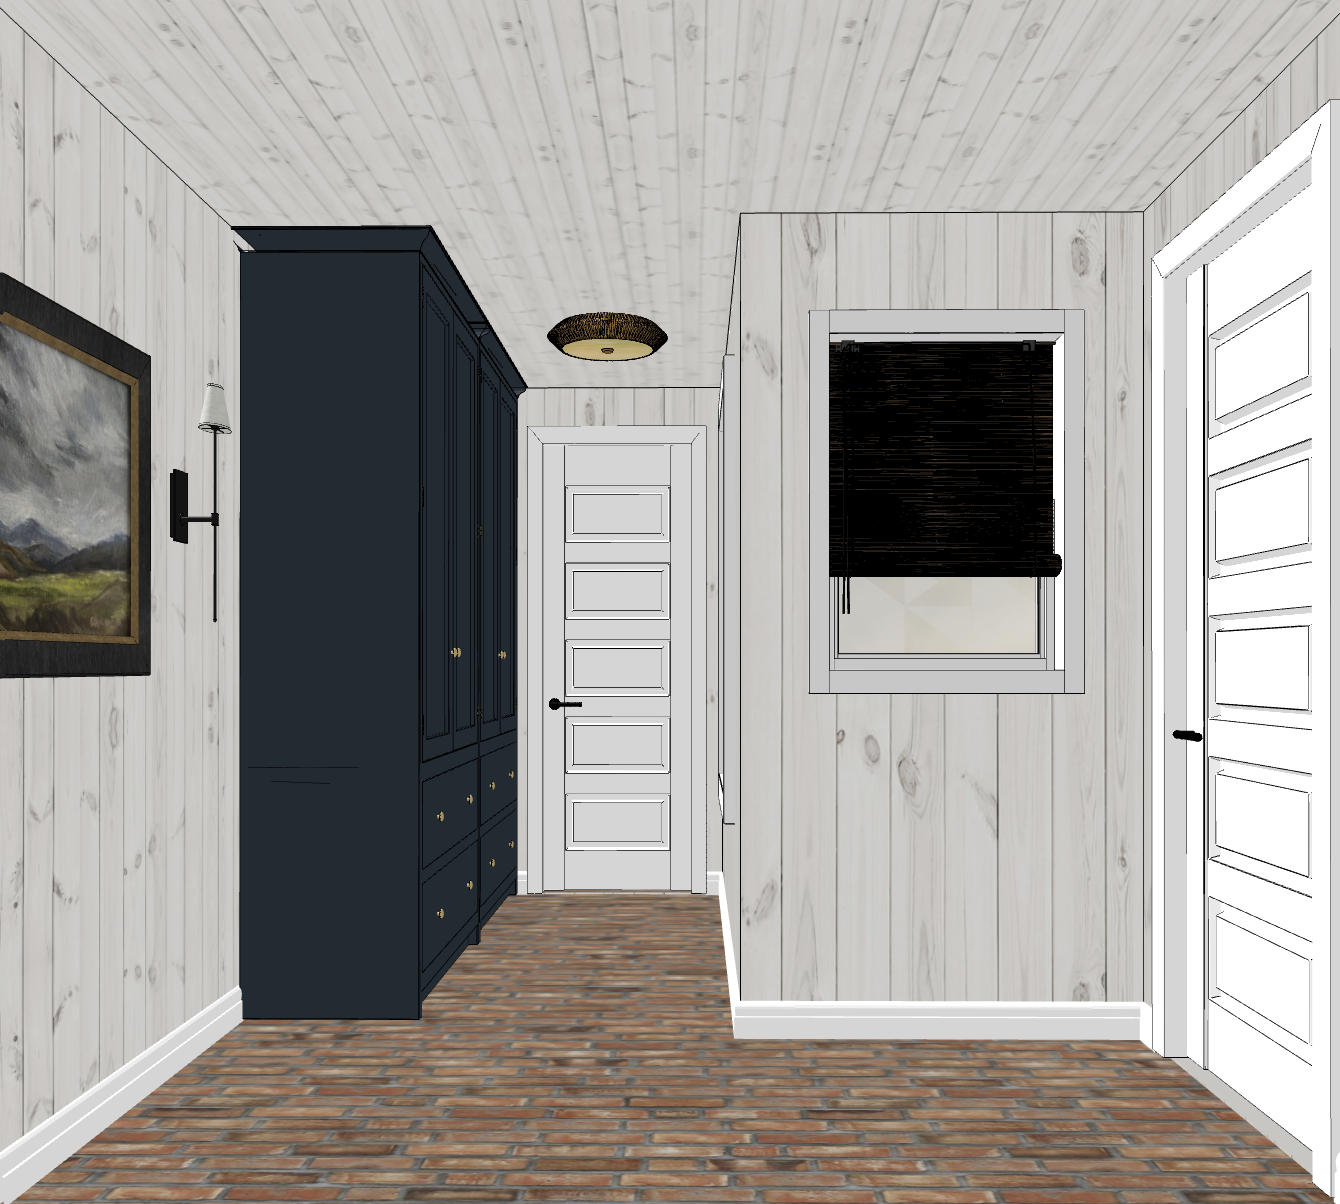 Laundry room renovation plans and renderings - Nadine Stay. Floor plan layouts and laundry room design plans. Custom closets and brick veneers in a laundry room. Laundry room design renderings by Nadine Stay